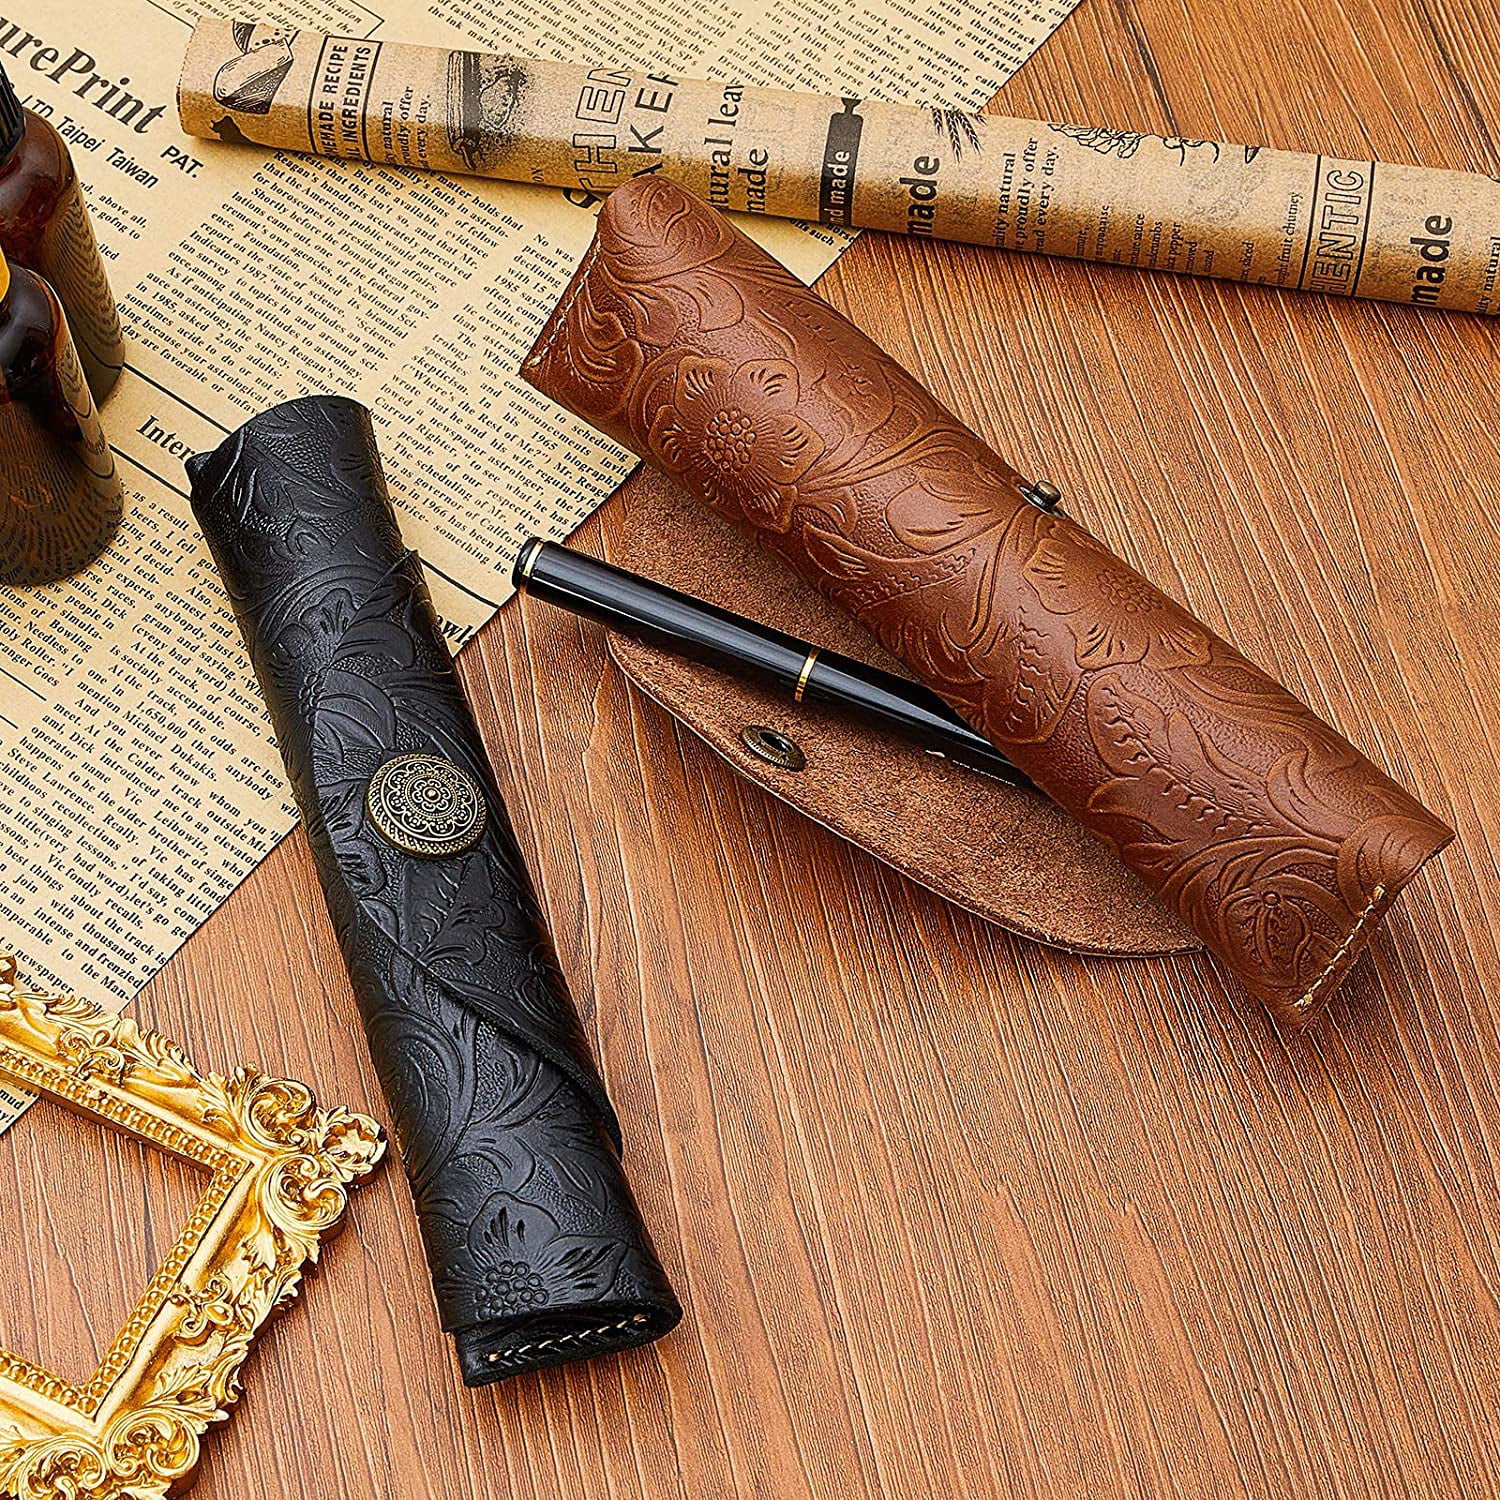 2 Pieces Vintage Handmade Leather Pen Case Carved Roll Leather Pen Holder Roll Wrap Pen Pouch for School Home Office Brown and Black